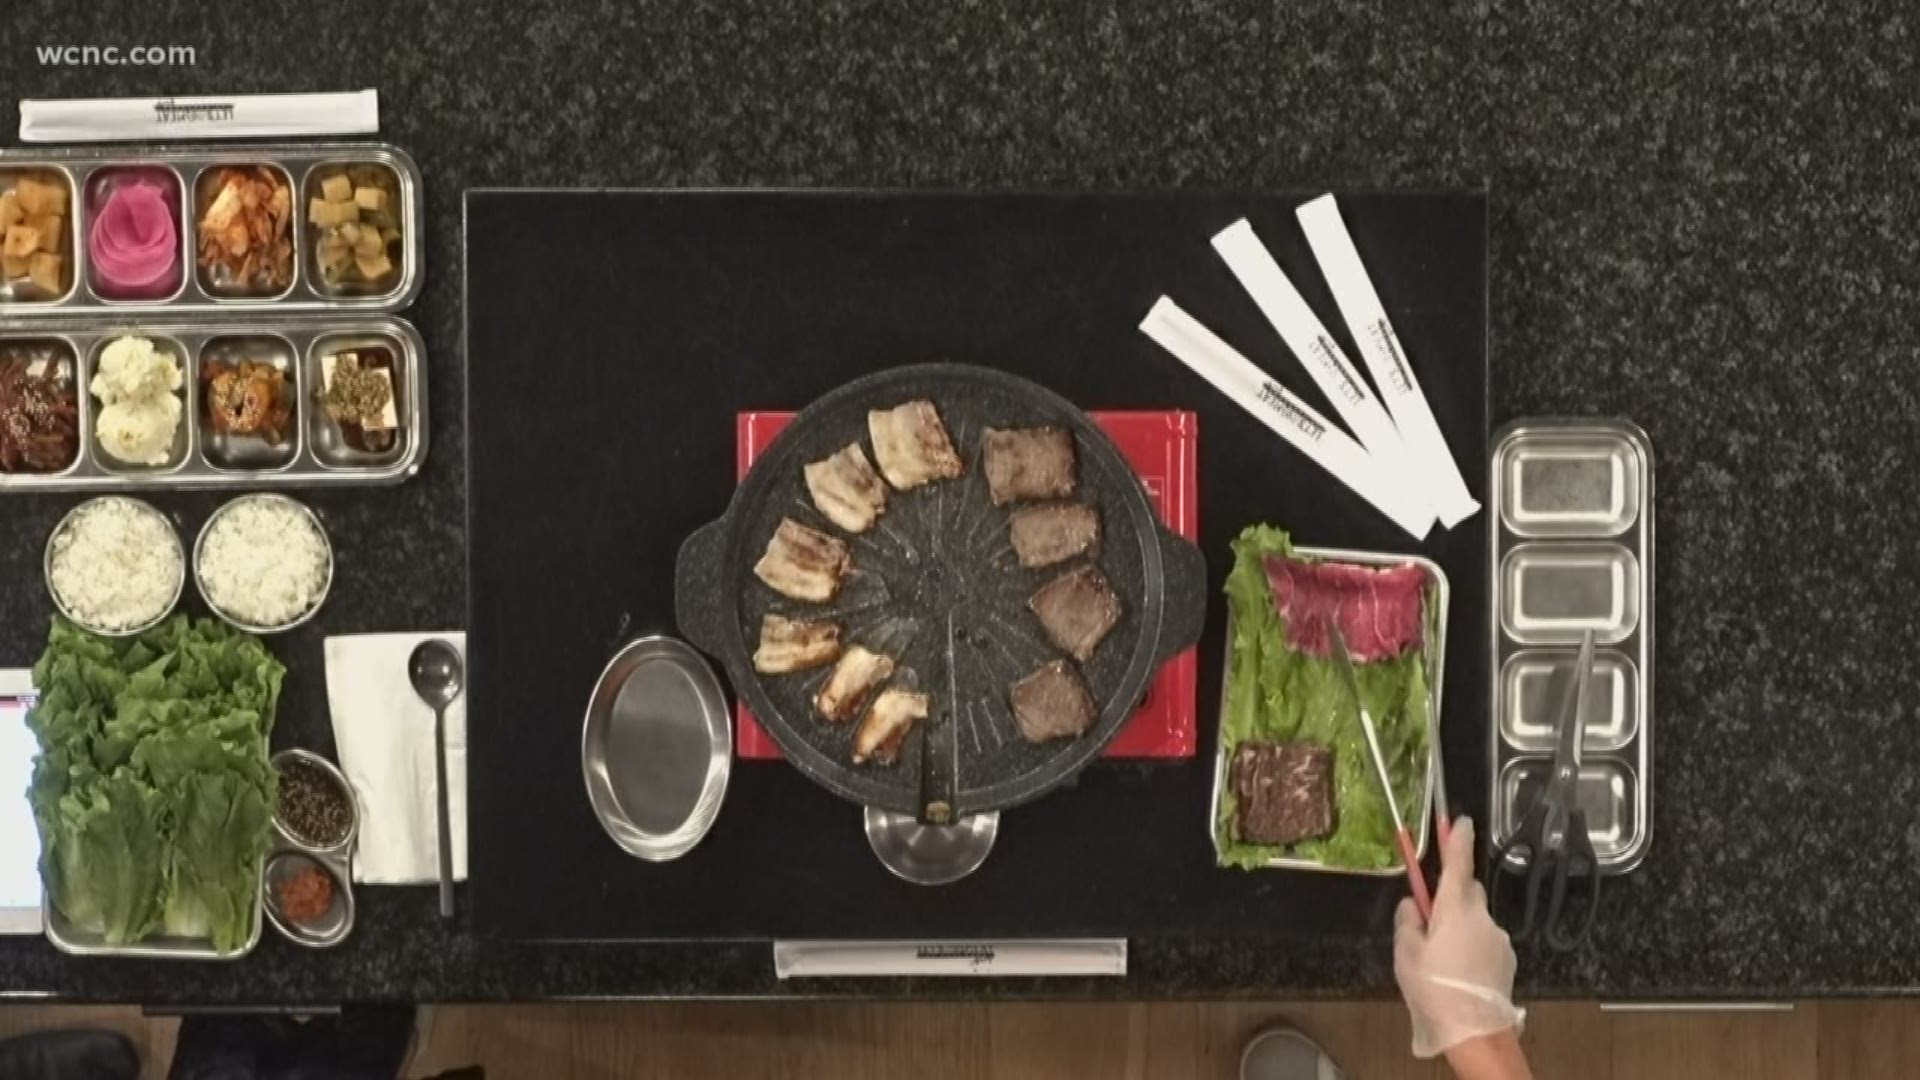 David Choi with Let’s Meat KBBQ shows us how to make traditional Korean BBQ ahead of the Asian Street Food Fair this weekend.